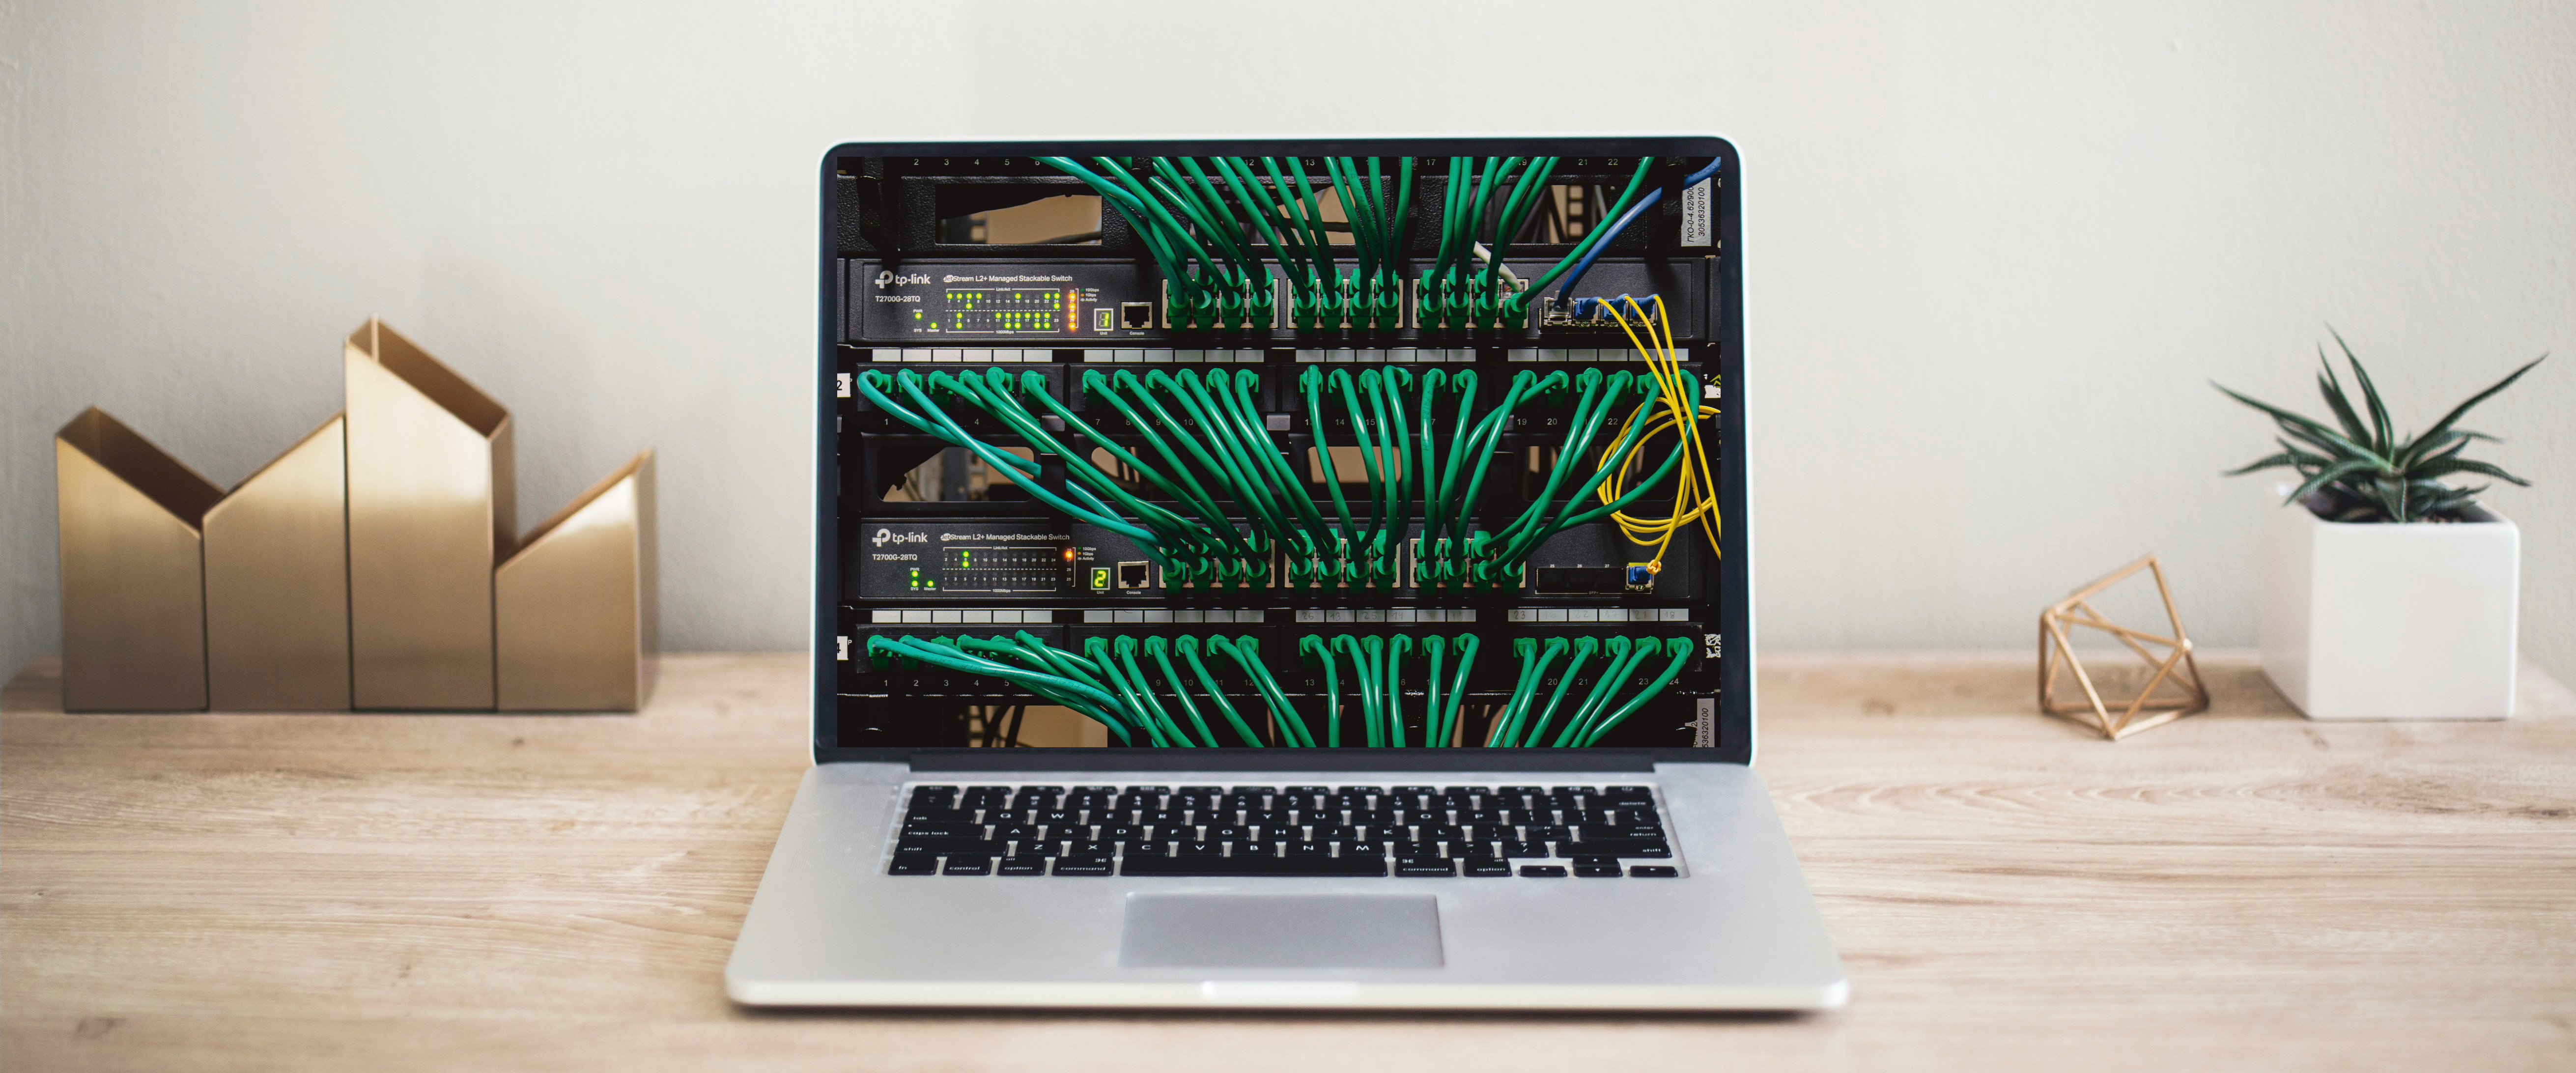 Laptop sitting on a clean wooden desktop showing an image of servers on the screen